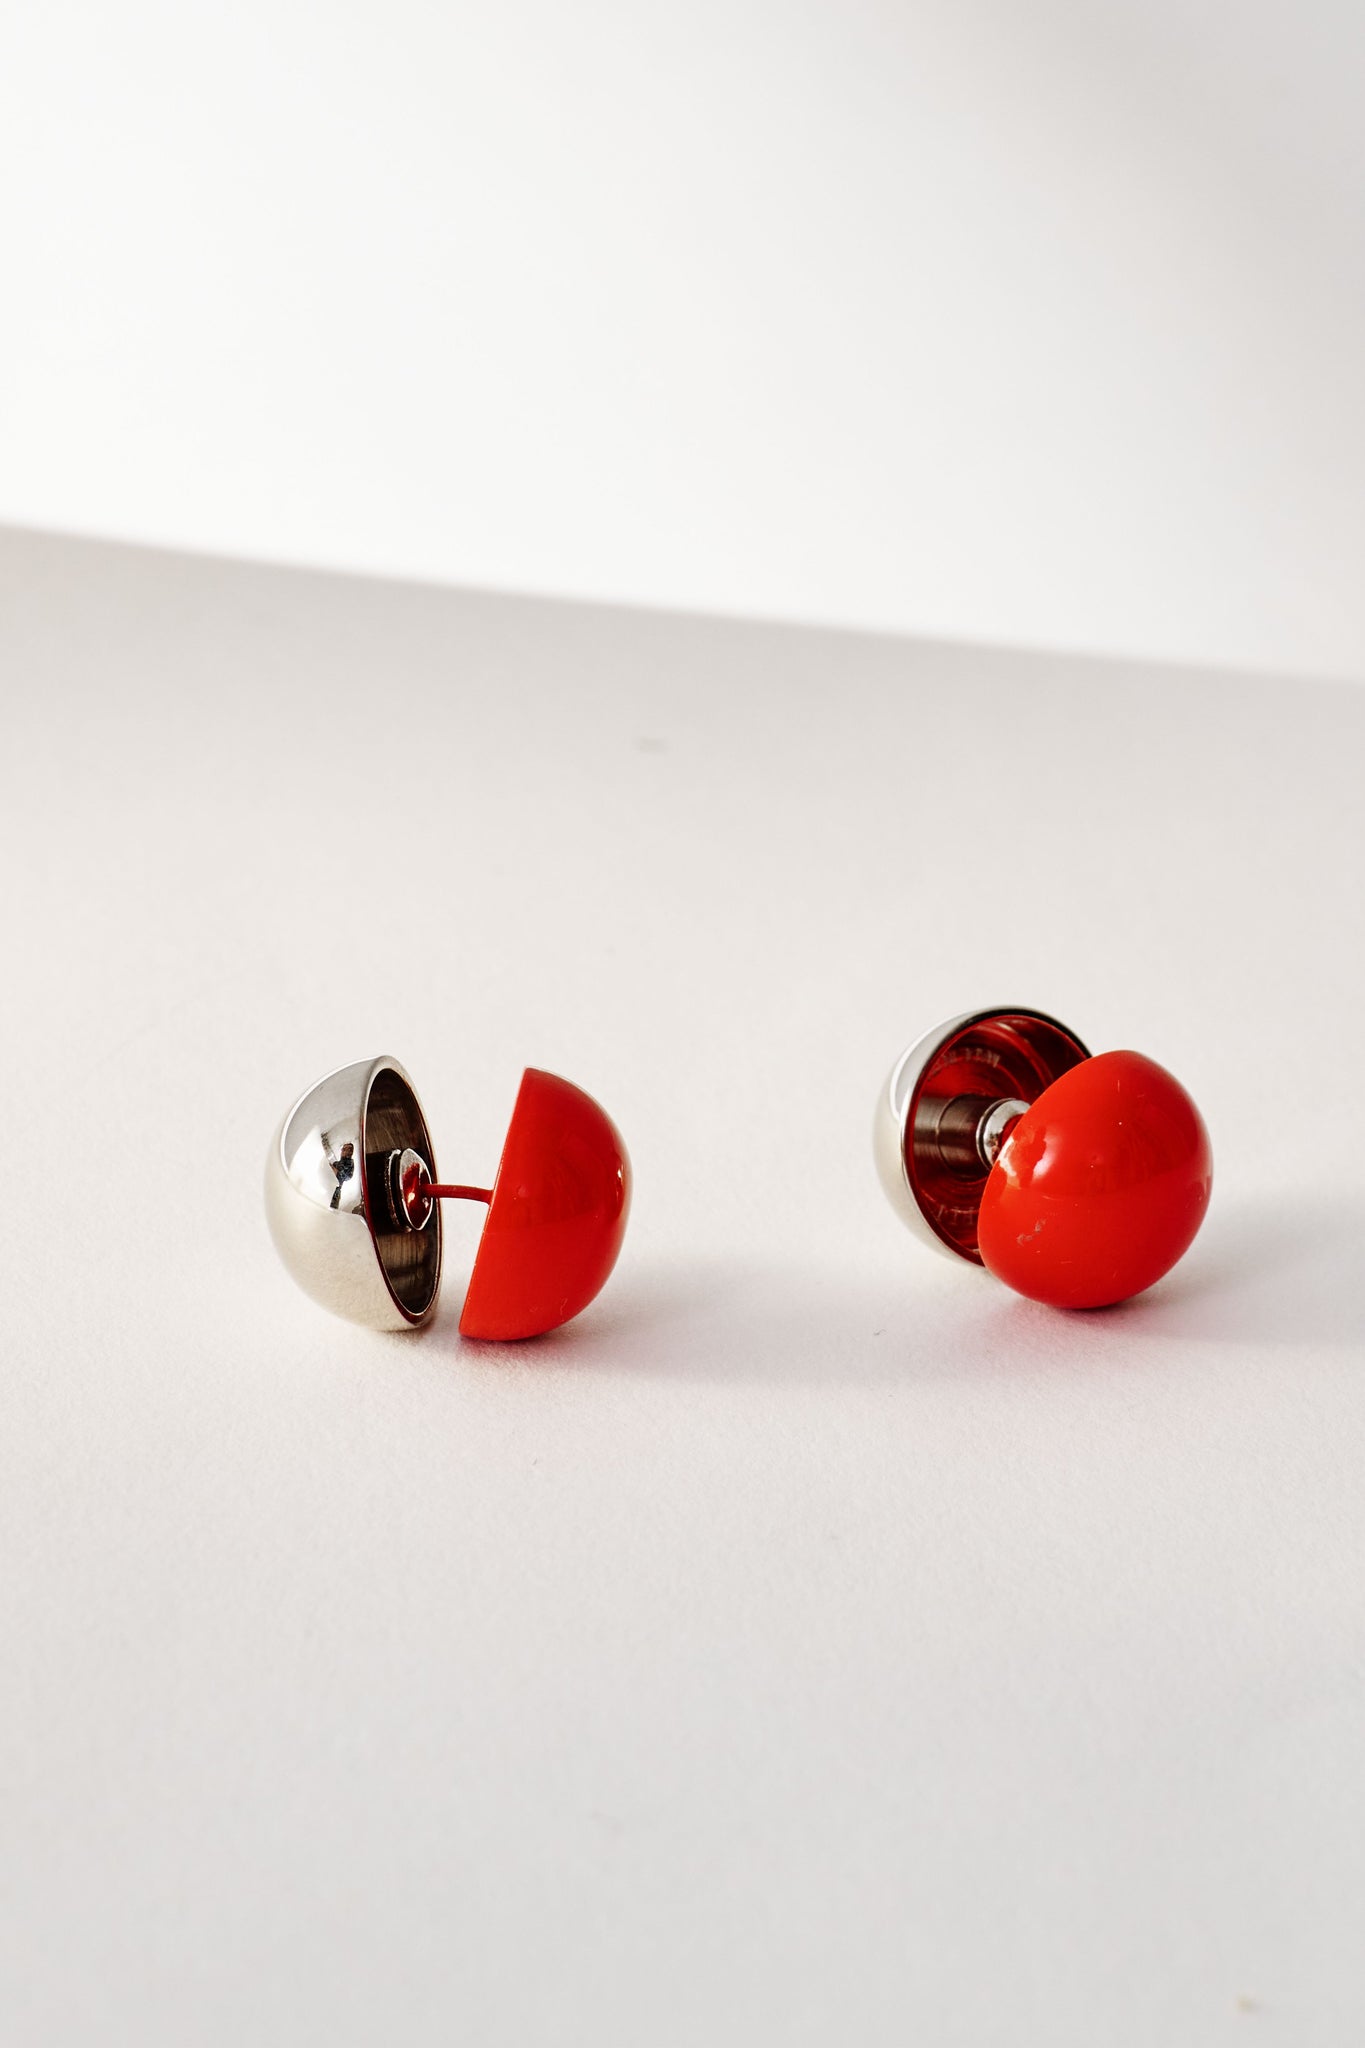 Bauhaus Style Red + Silver Earrings